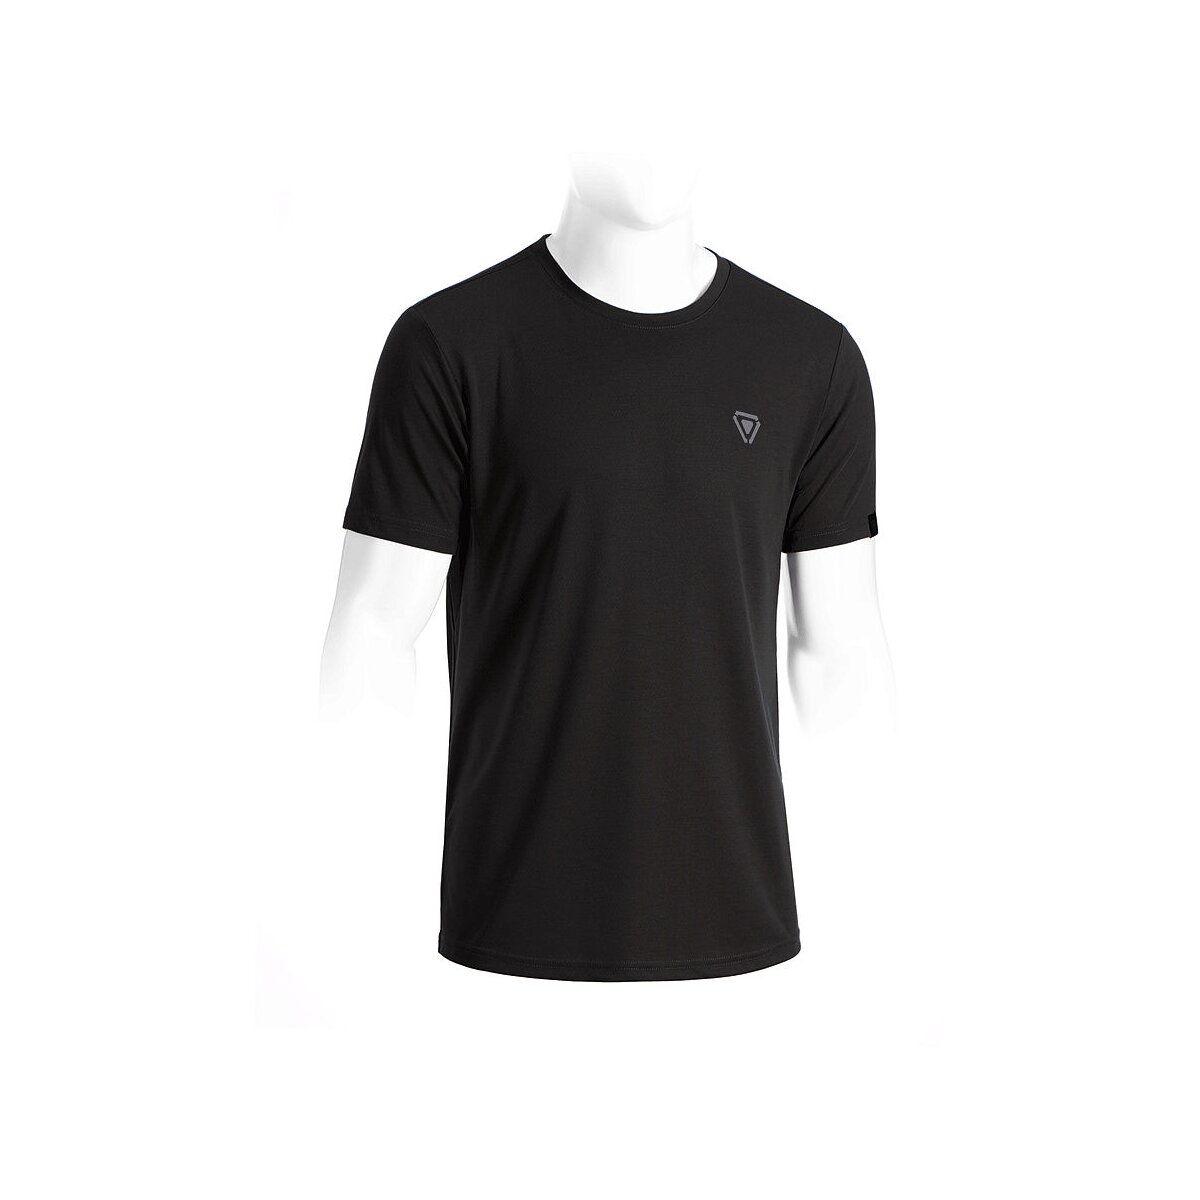 Outrider Tactical T.O.R.D. Performance Utility Tee T-Shirt, 26,90 €